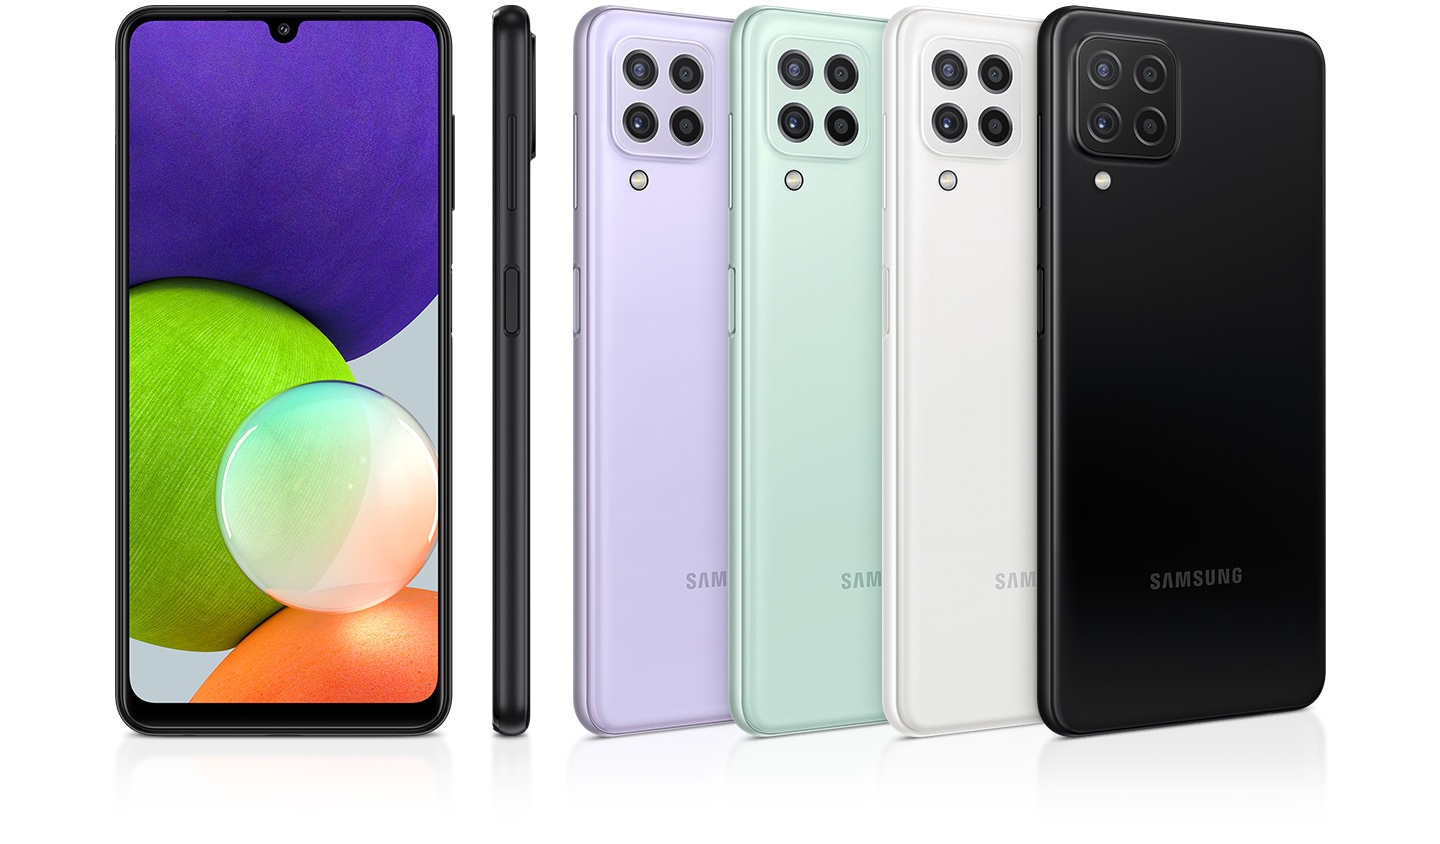 There is a glossy back view of 4 smartphones in black, white, mint, and violet, along with a profile and front view highlighting the premium gloss finish.